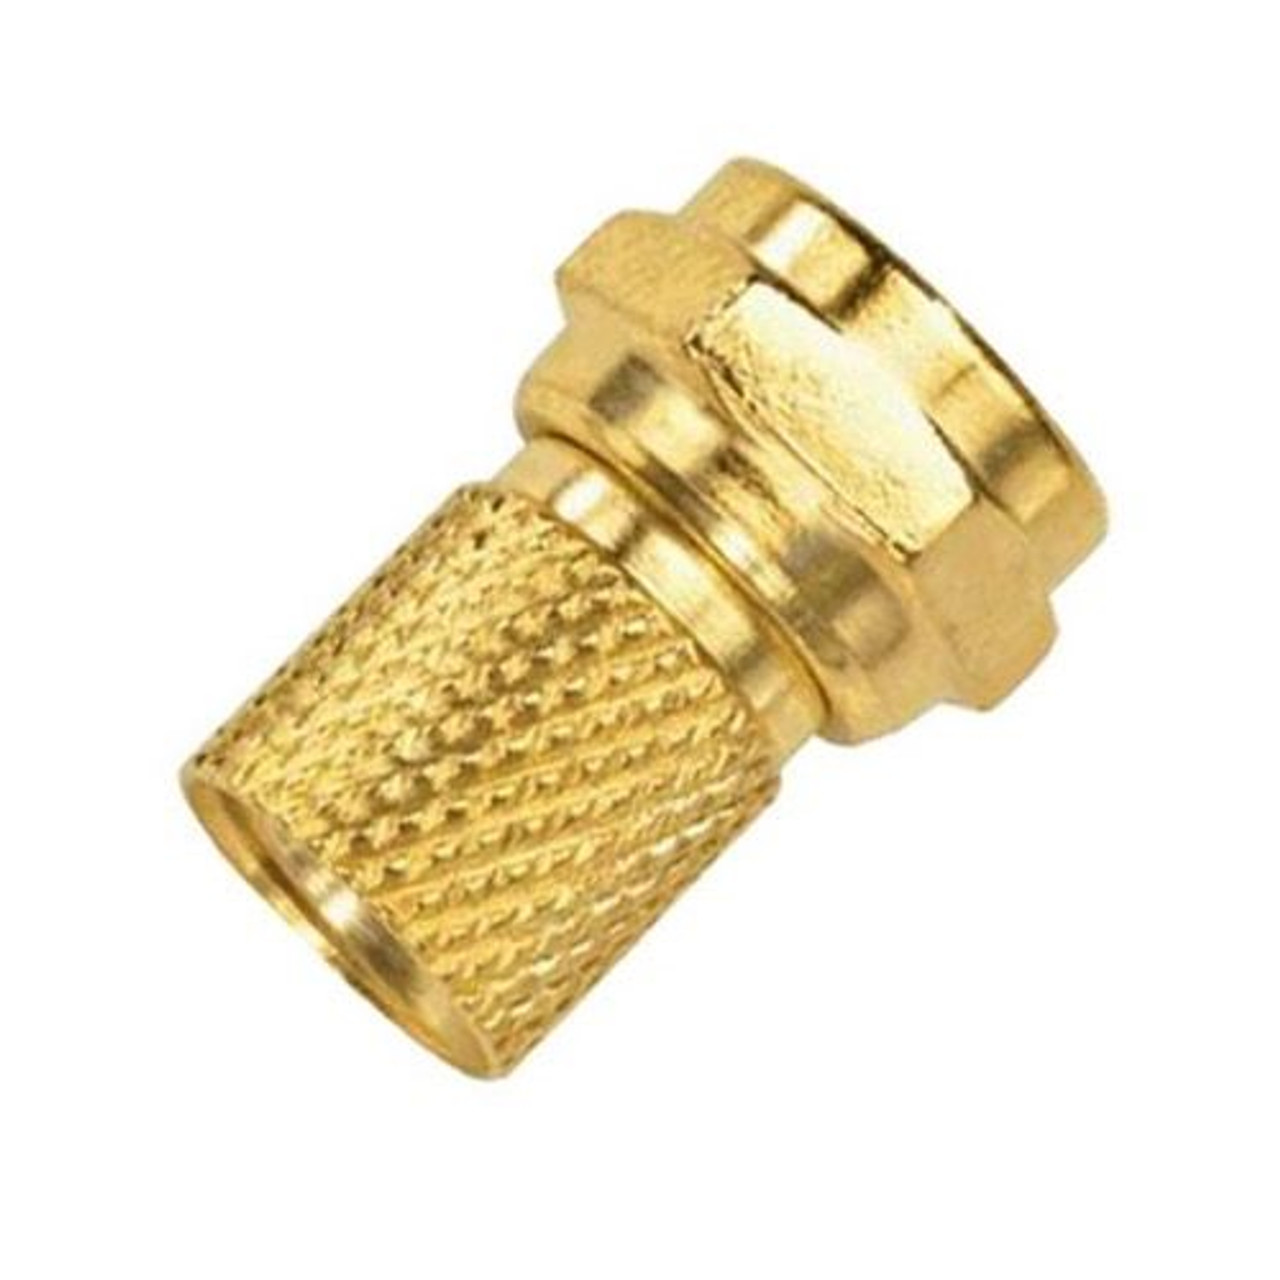 Phillips PH-61028 Twist-On Gold Plated RG6 F Connector 1 Pack RG-6 Coaxial Cable Digital Satellite Dish Antenna TV Signal Tool Less Connector, Easy Hook-Up Component Plugs, Part # PH61028